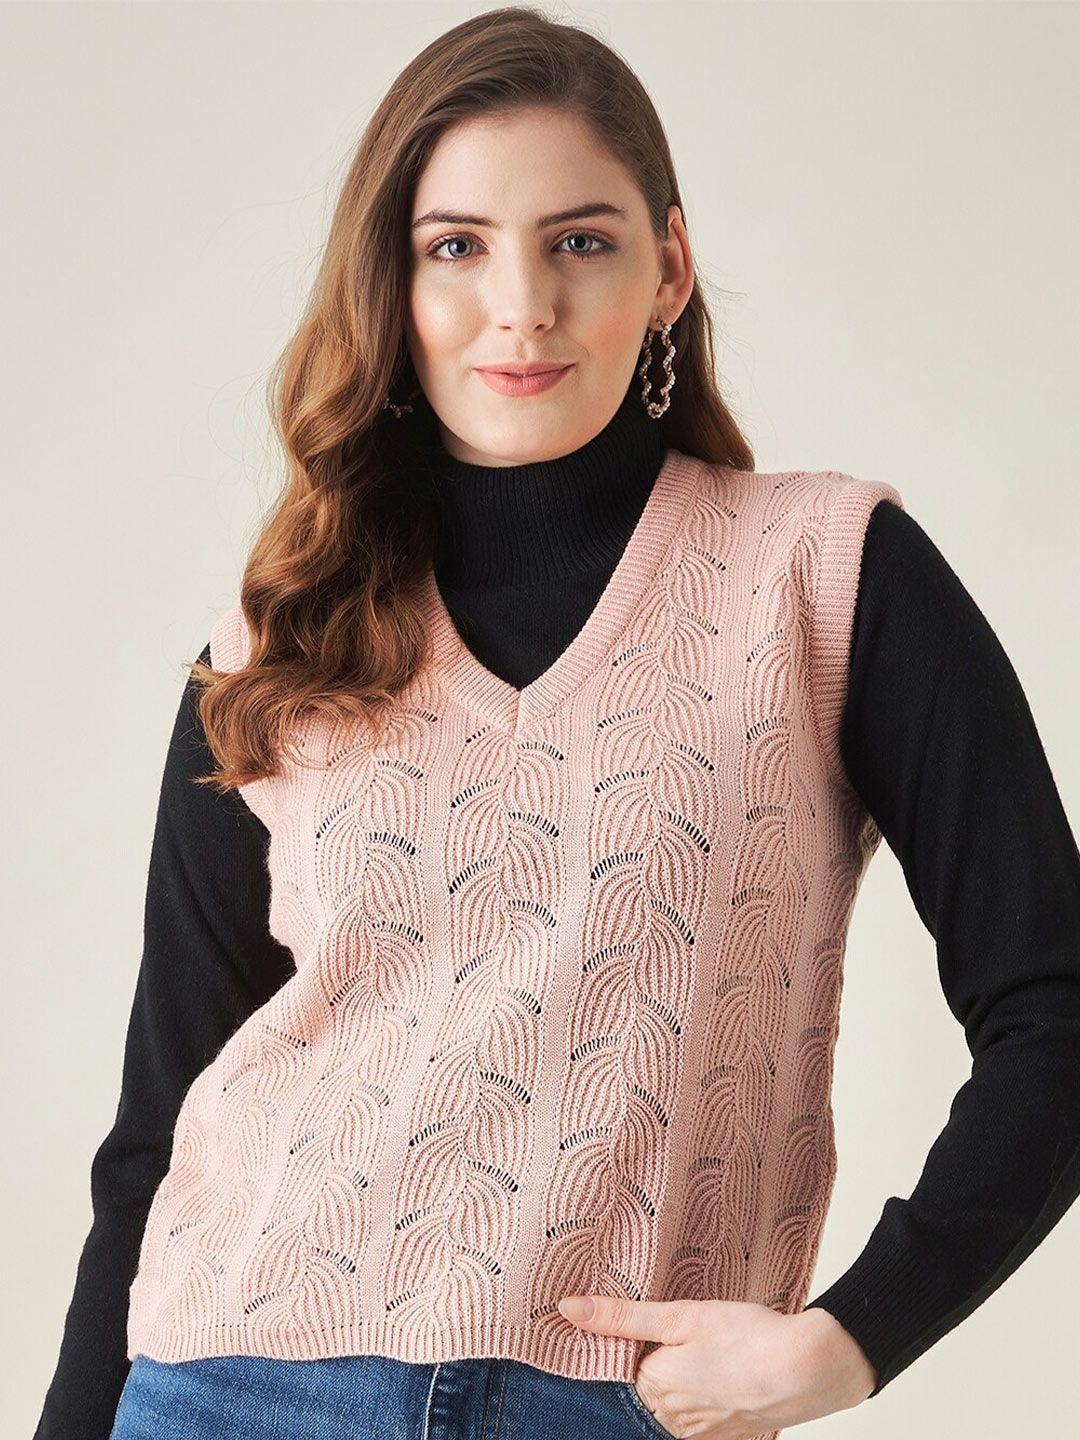 modeve women peach-coloured acrylic cable knit sweater vest